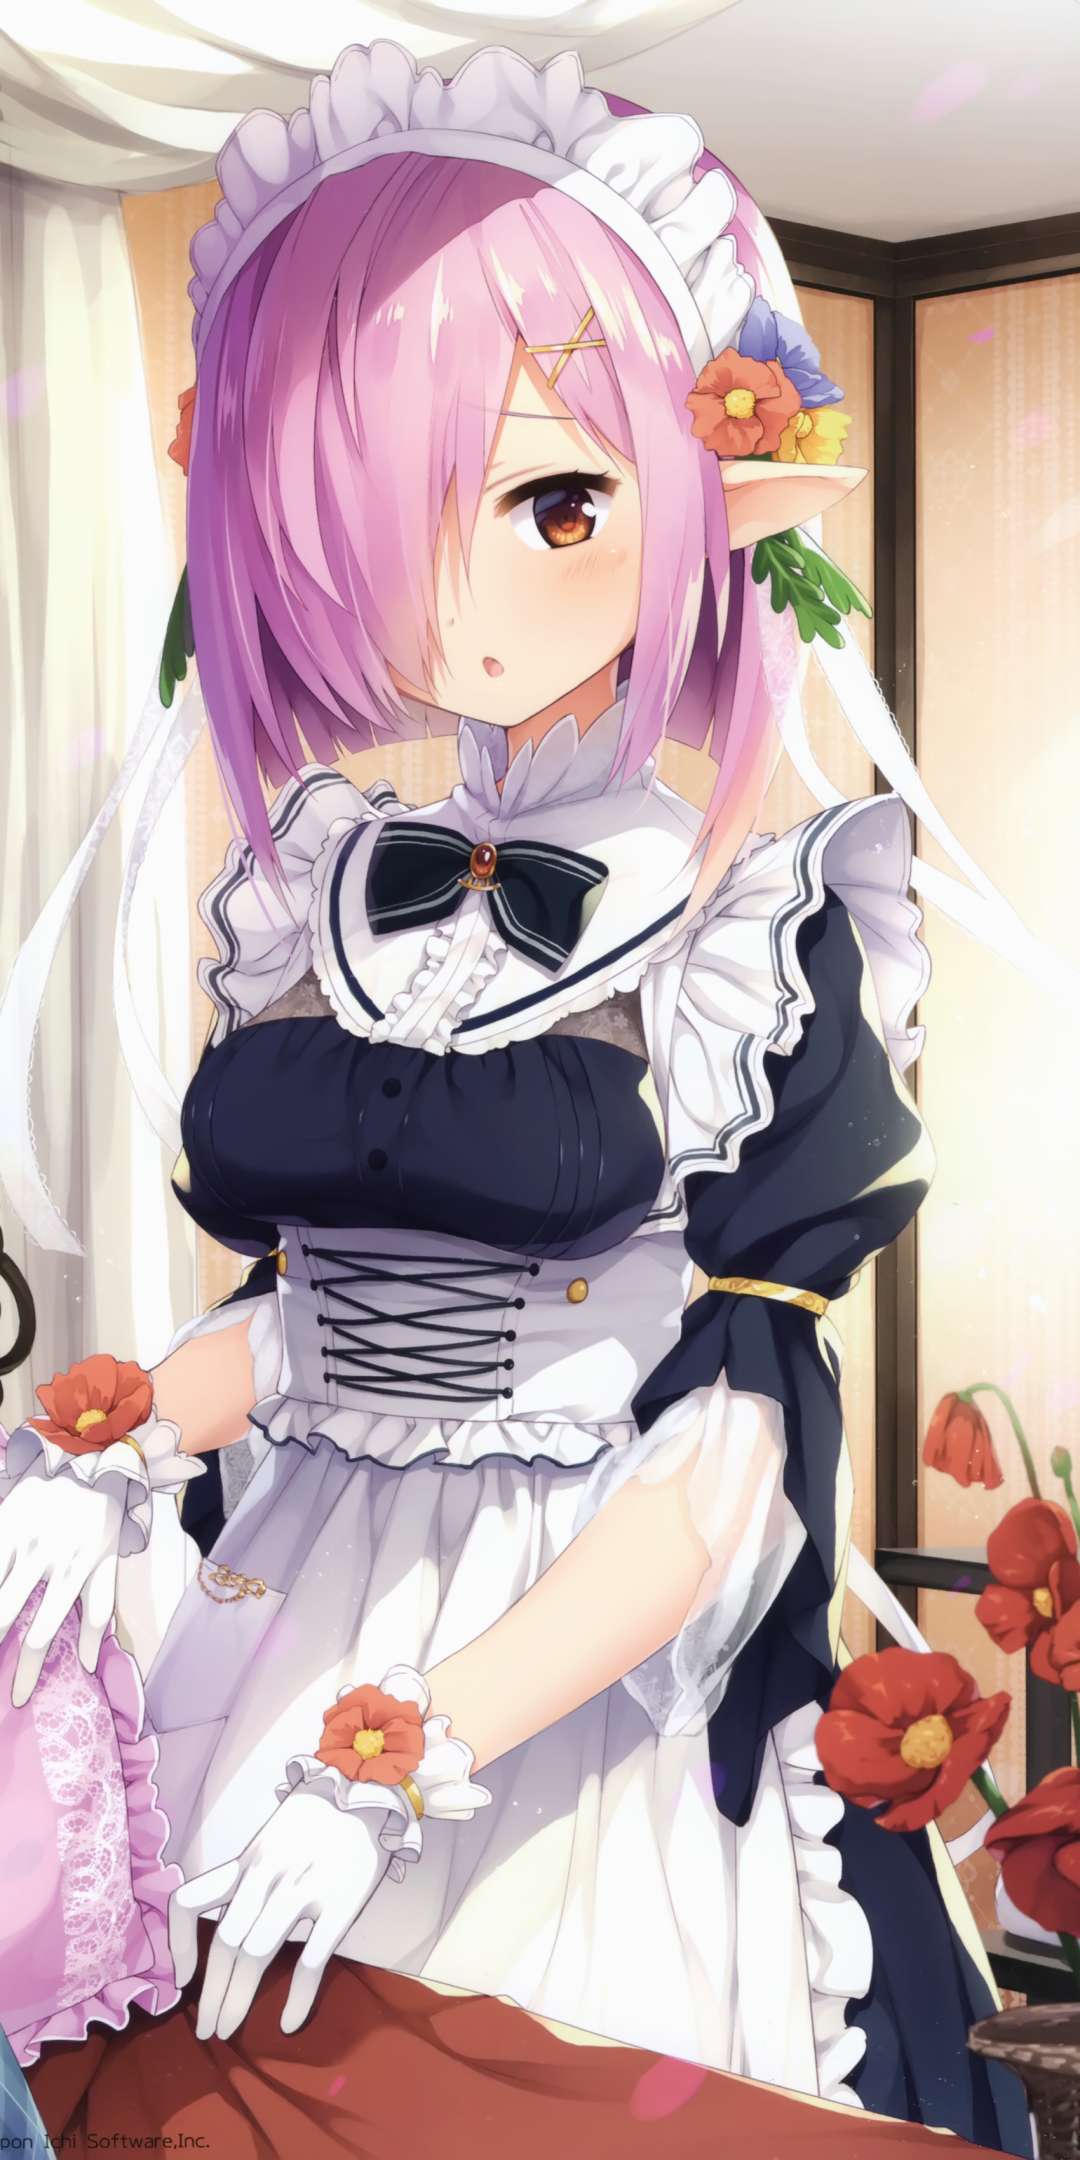 Download 1080x2160 Anime Maid Girl, Pink Hair, Elf Ears, Maid Outfit, Headband Wallpaper for Huawei Mate 10